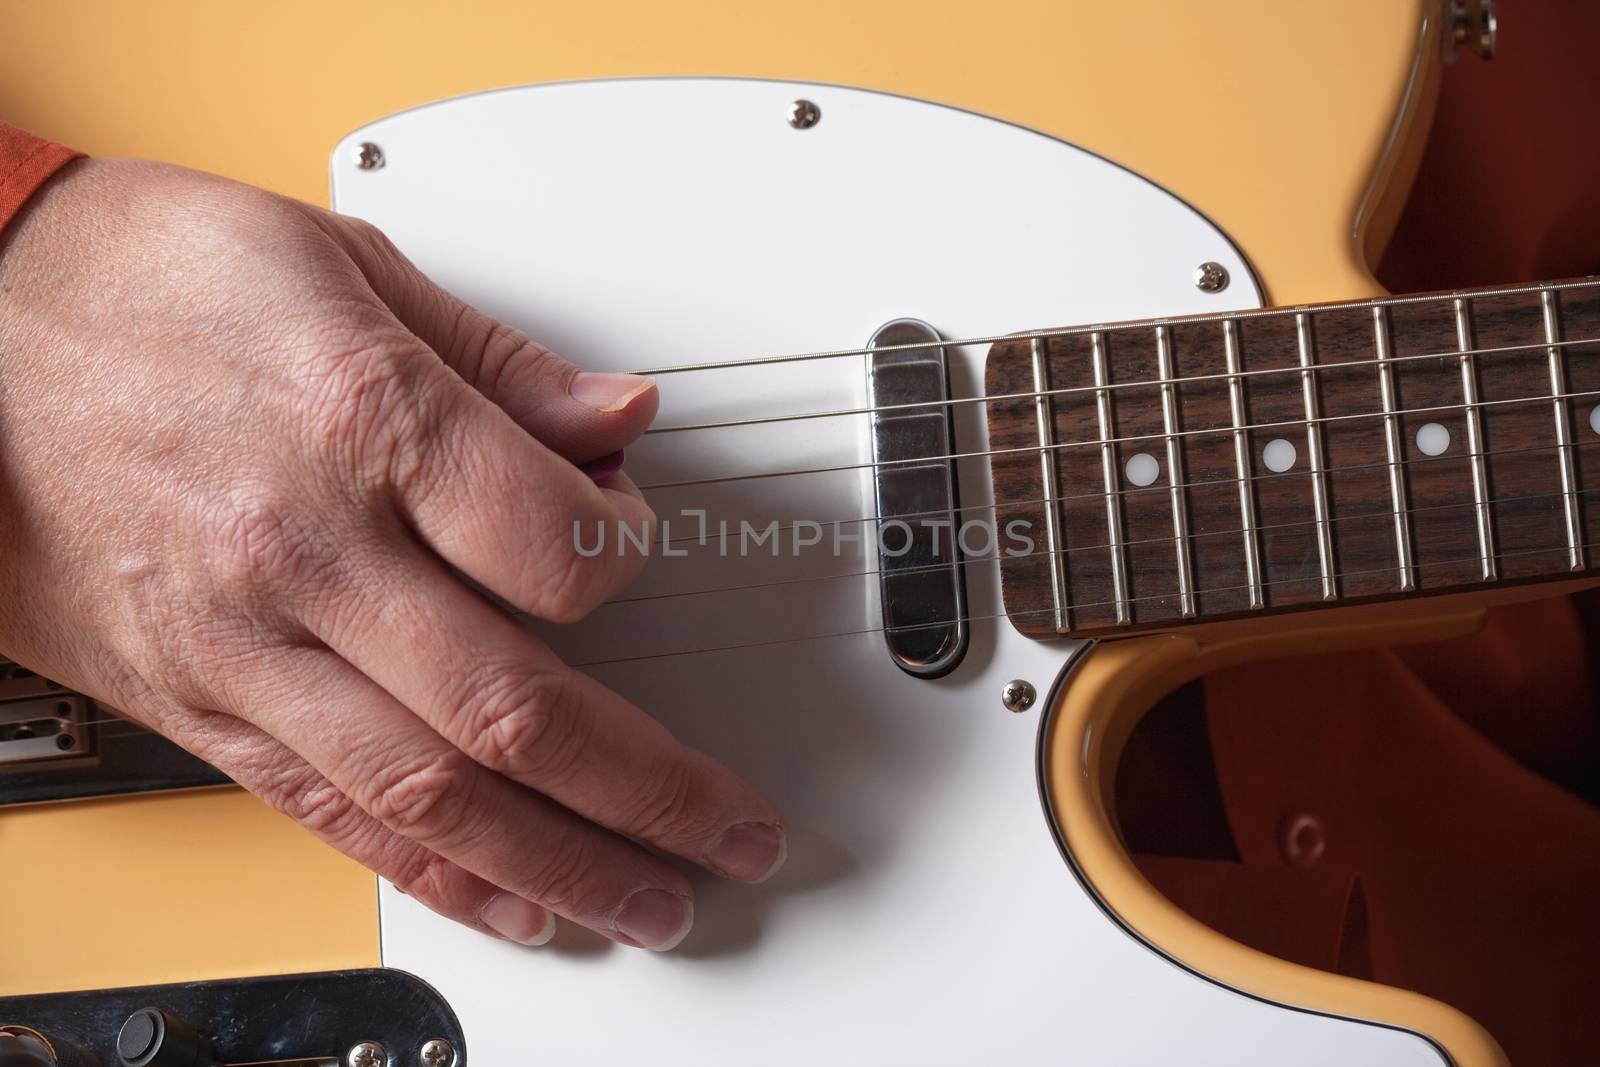 closeup of hands of a musician playing electric guitar